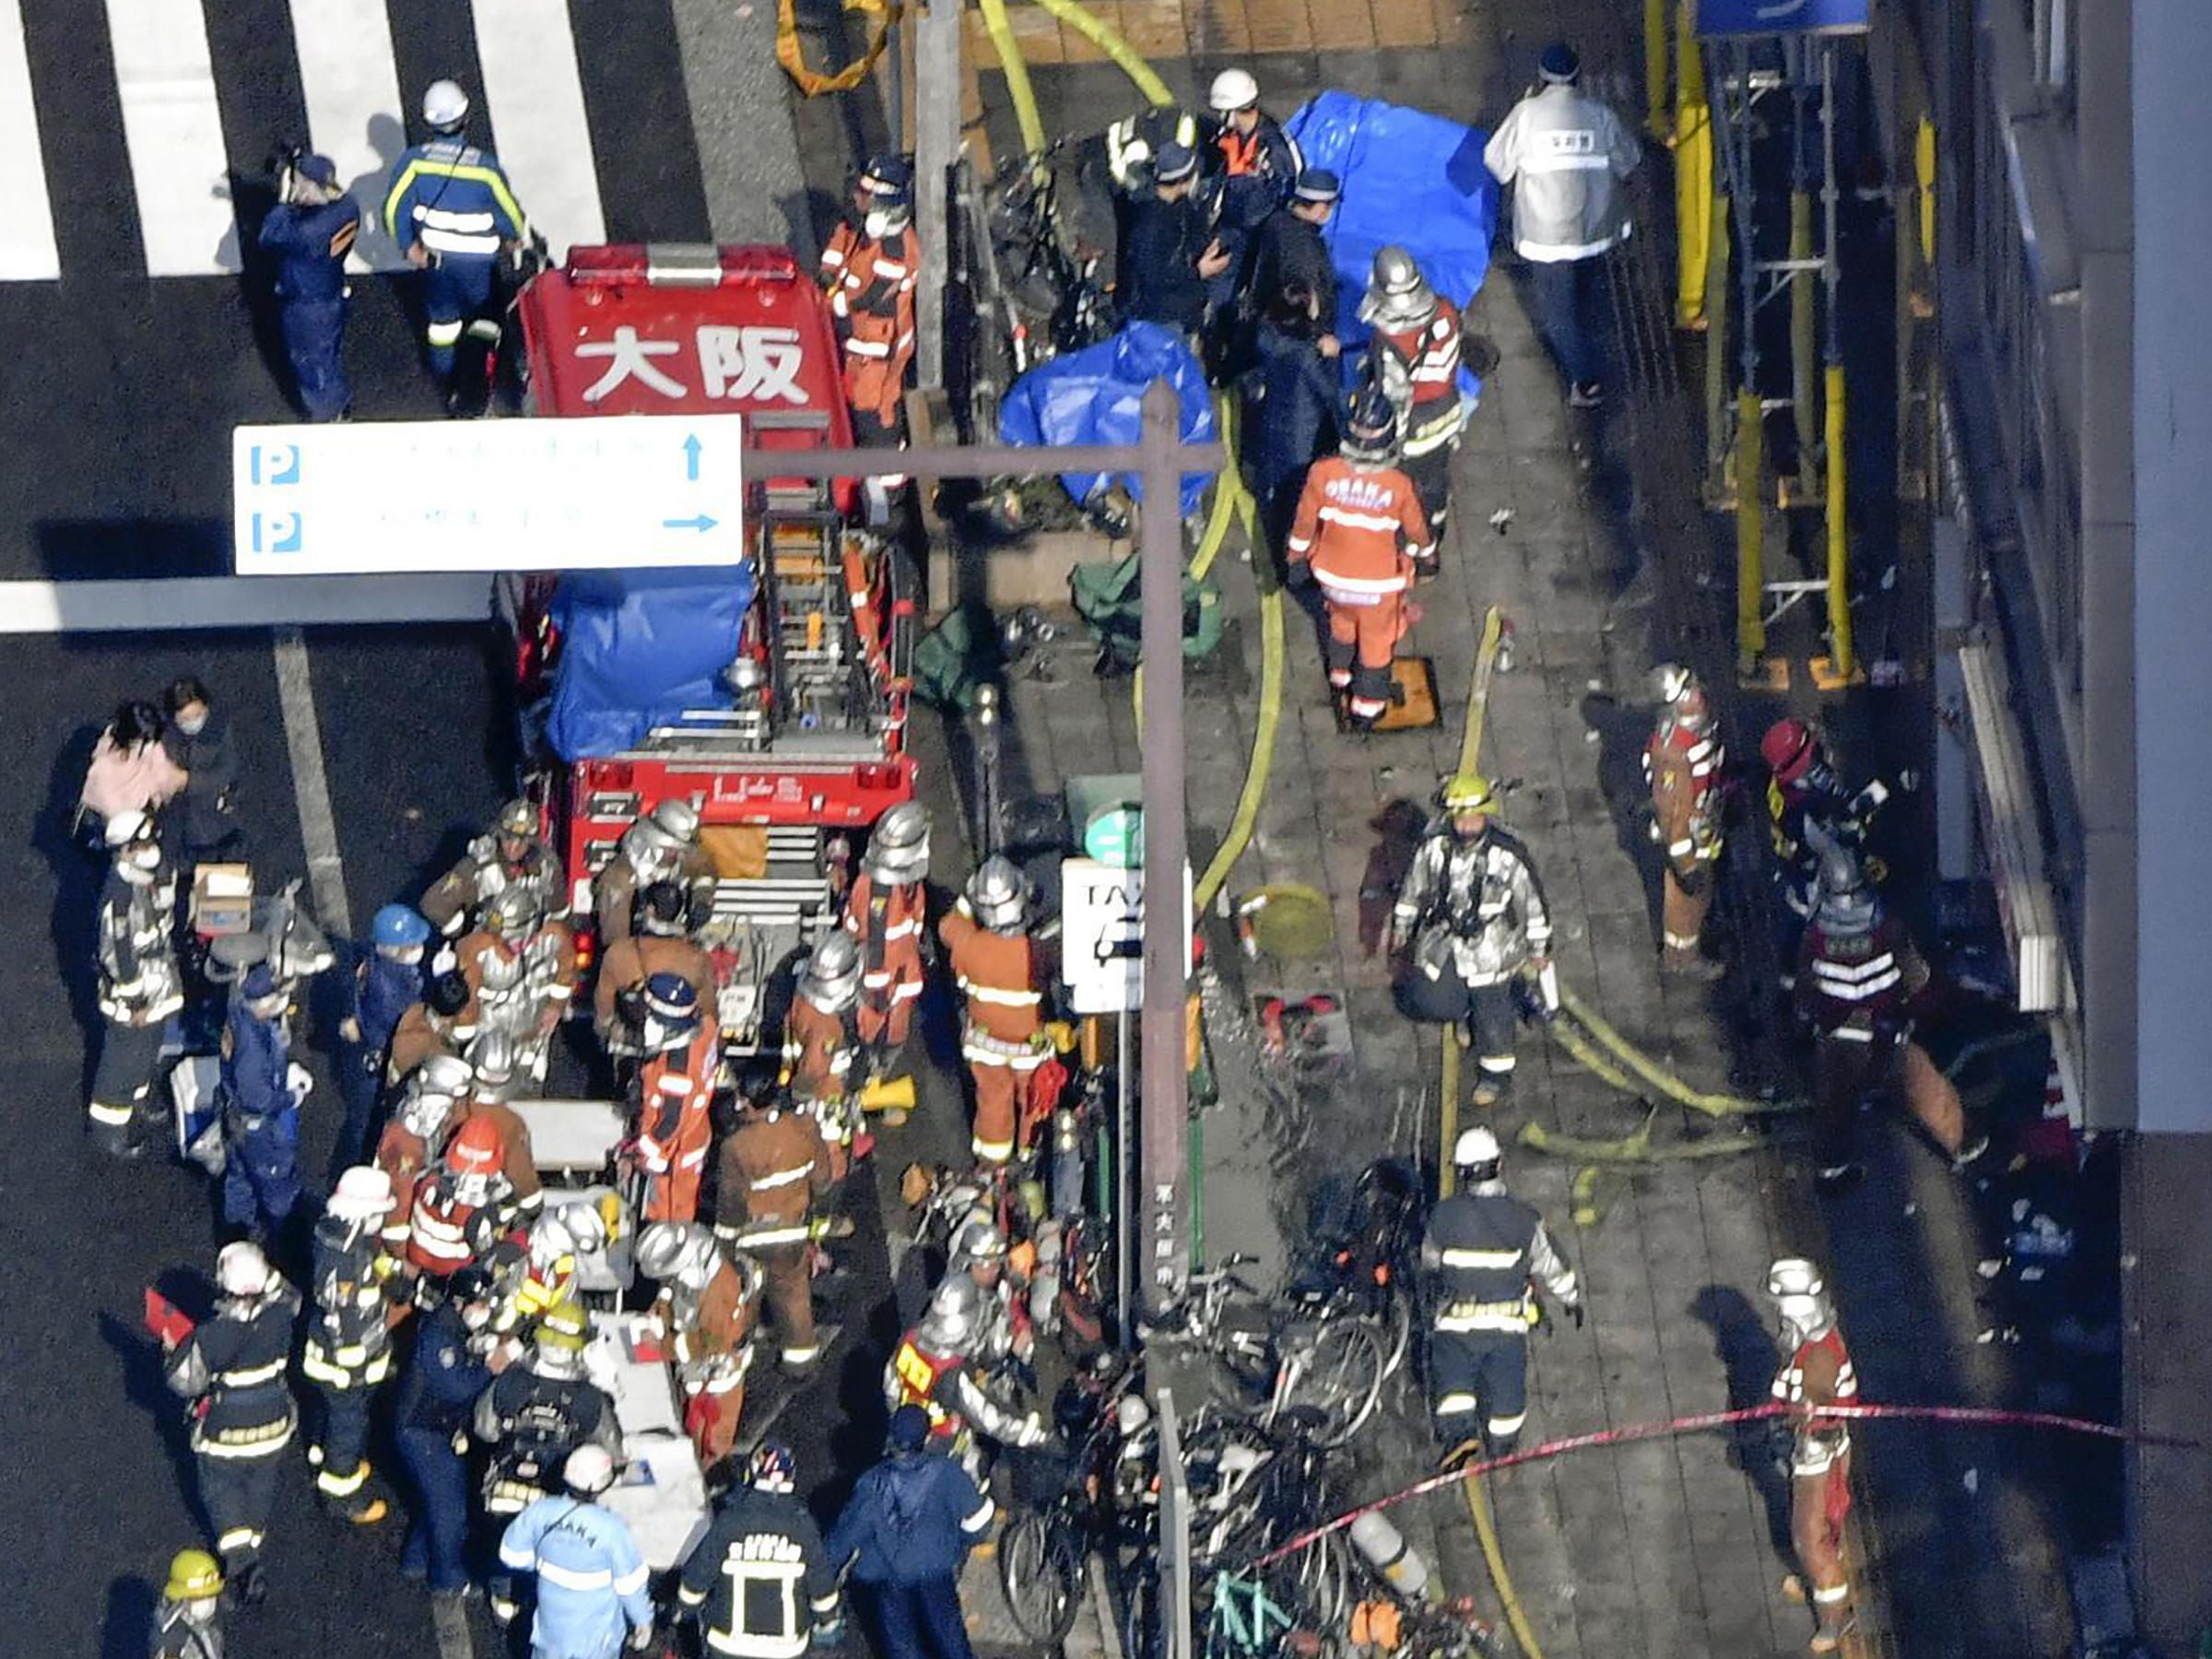 Over 20 people are assumed to died in a building fire in Japan.